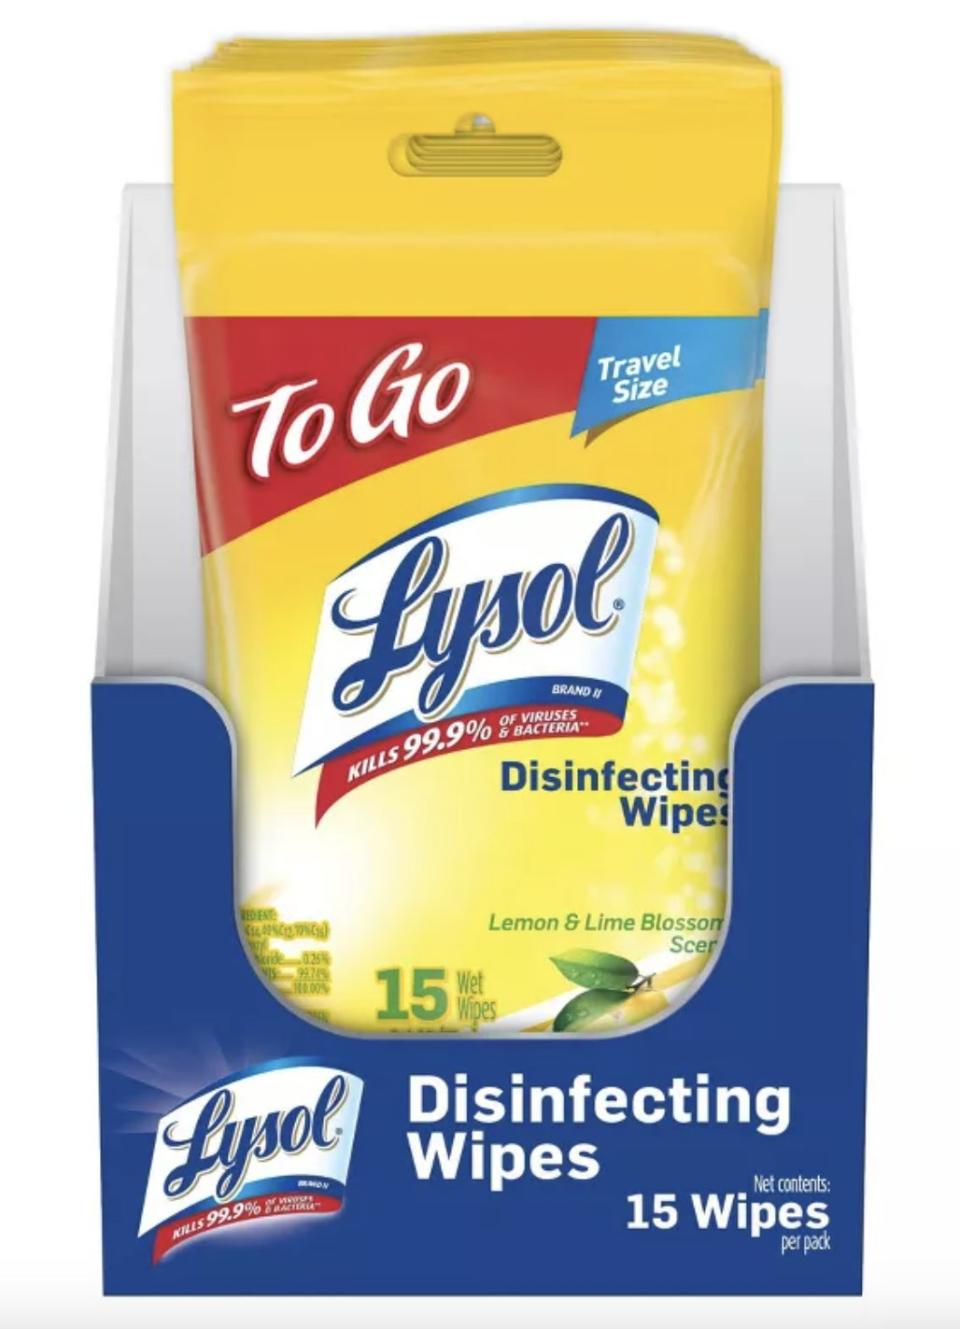 a package of Lysol disinfecting wipes